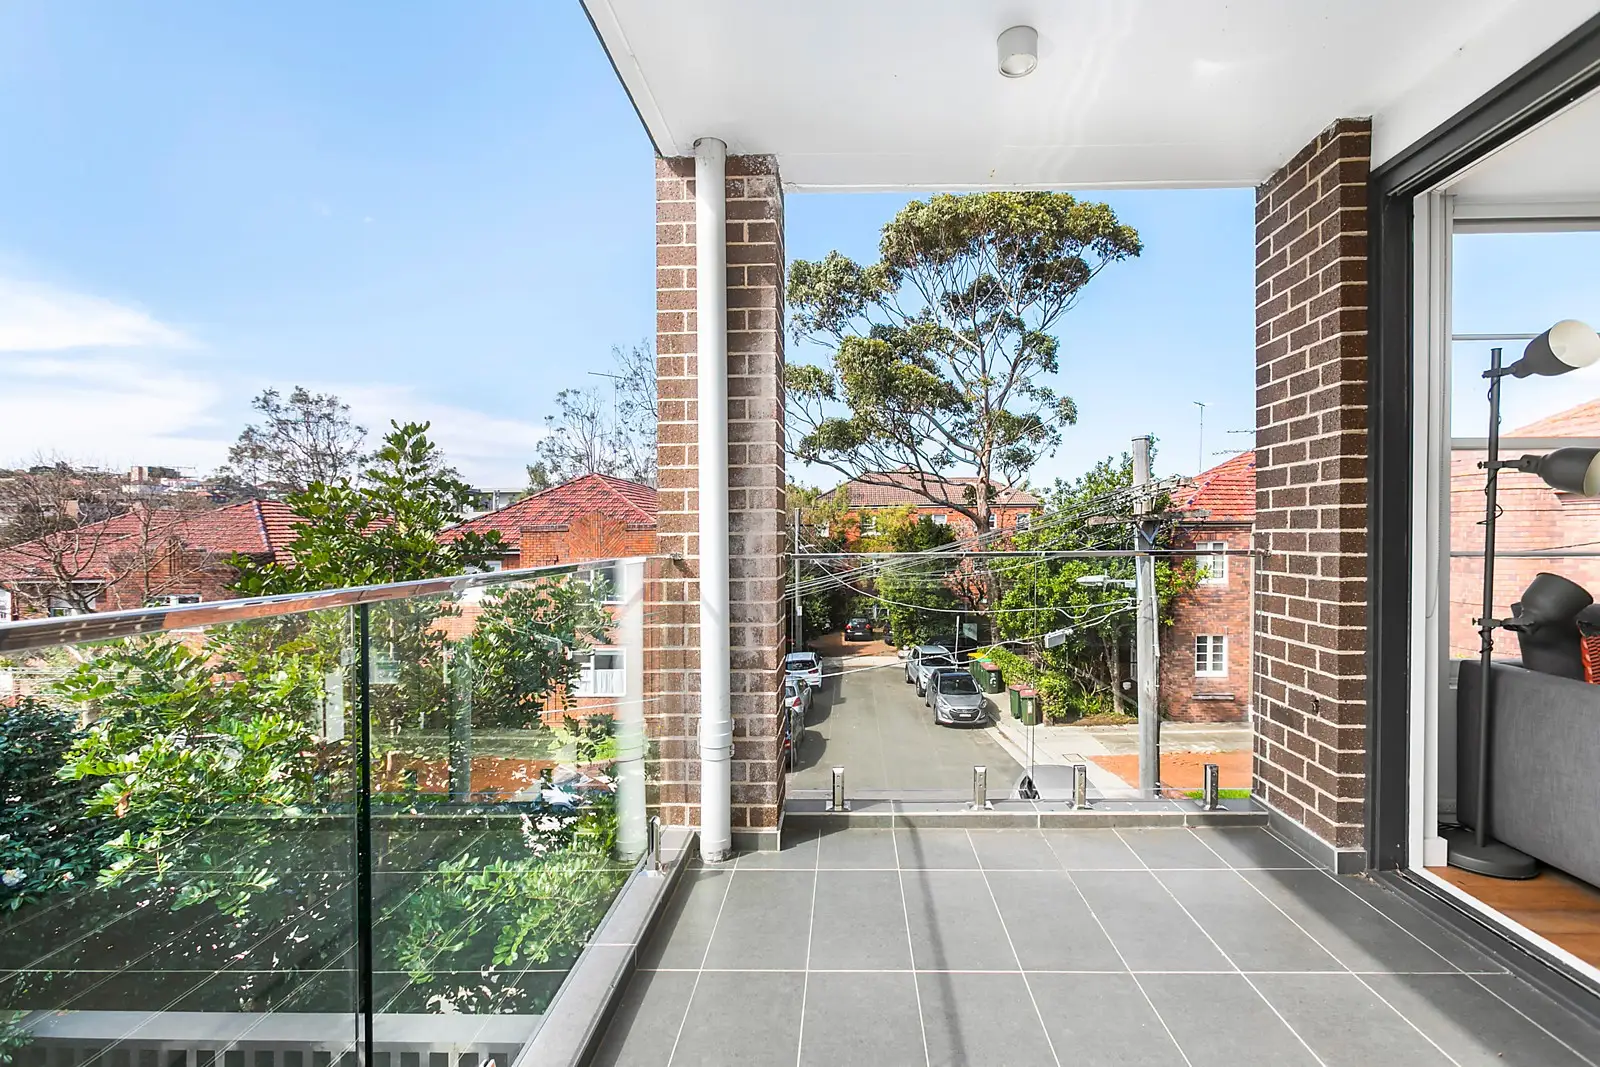 Photo #2: 6/9 Glenwood Avenue, Coogee - Sold by Sydney Sotheby's International Realty